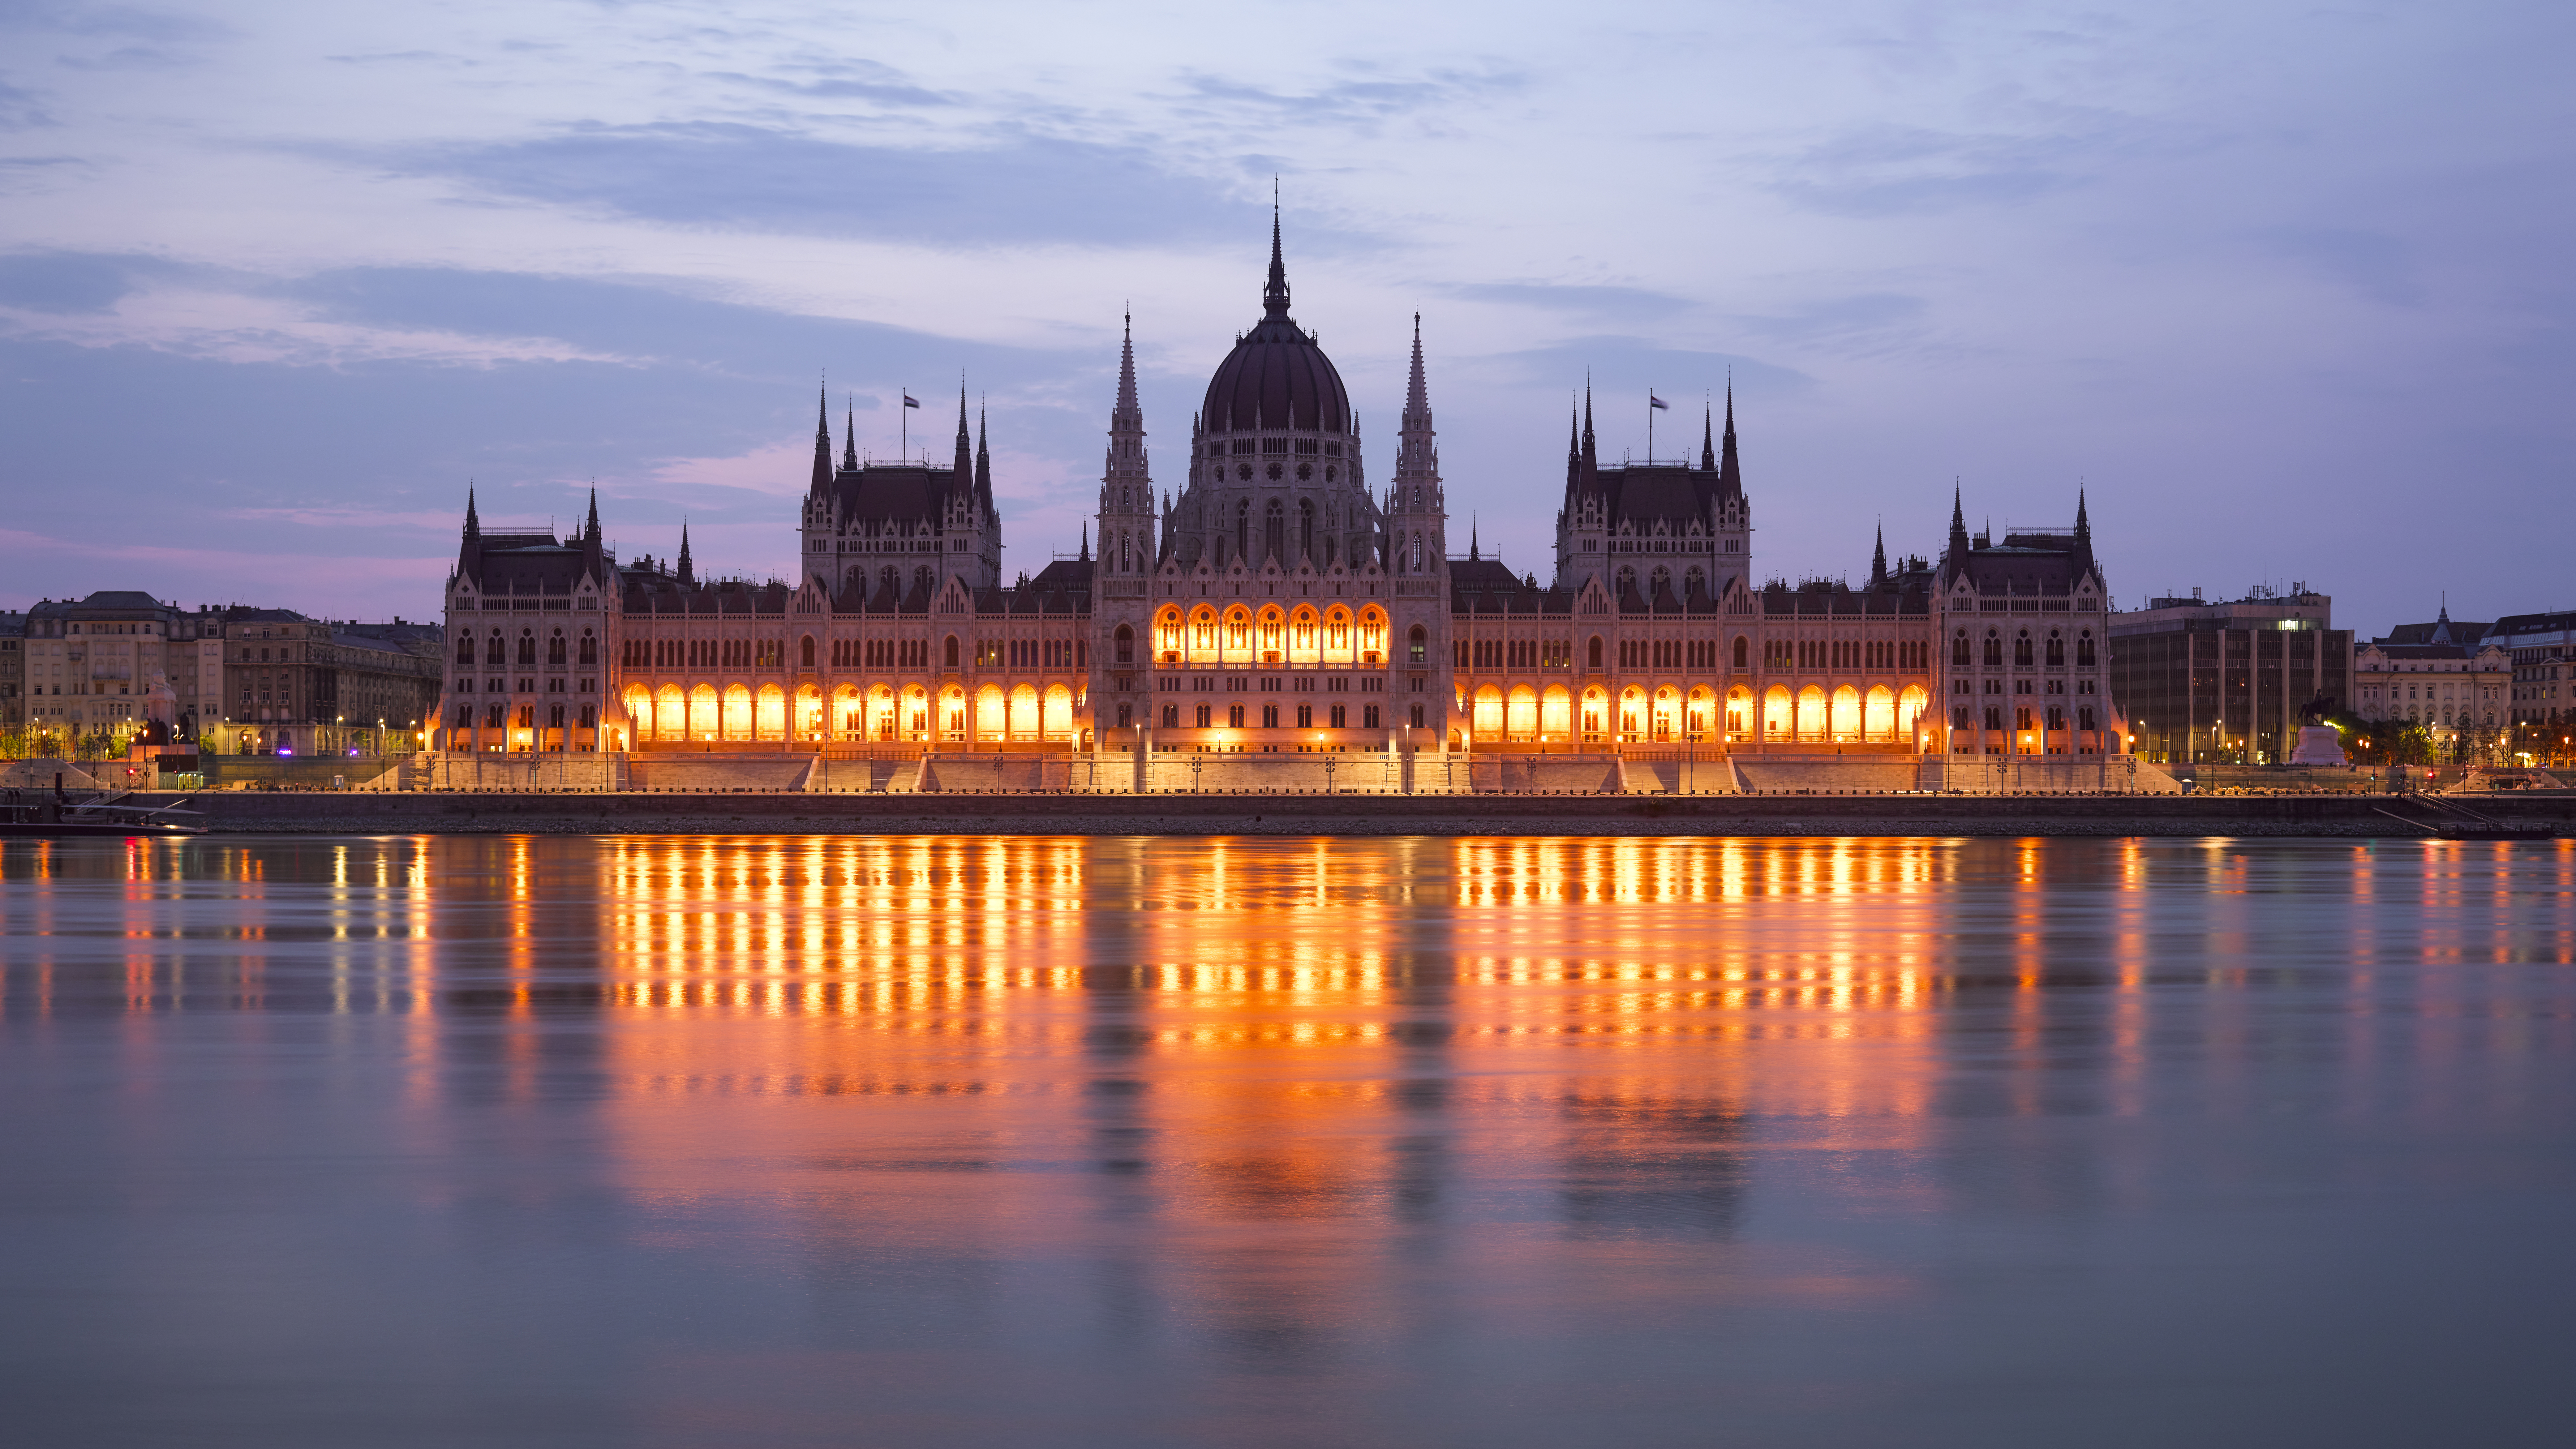 A picture of the Danube river with the Budapest Parliament in the background at night.